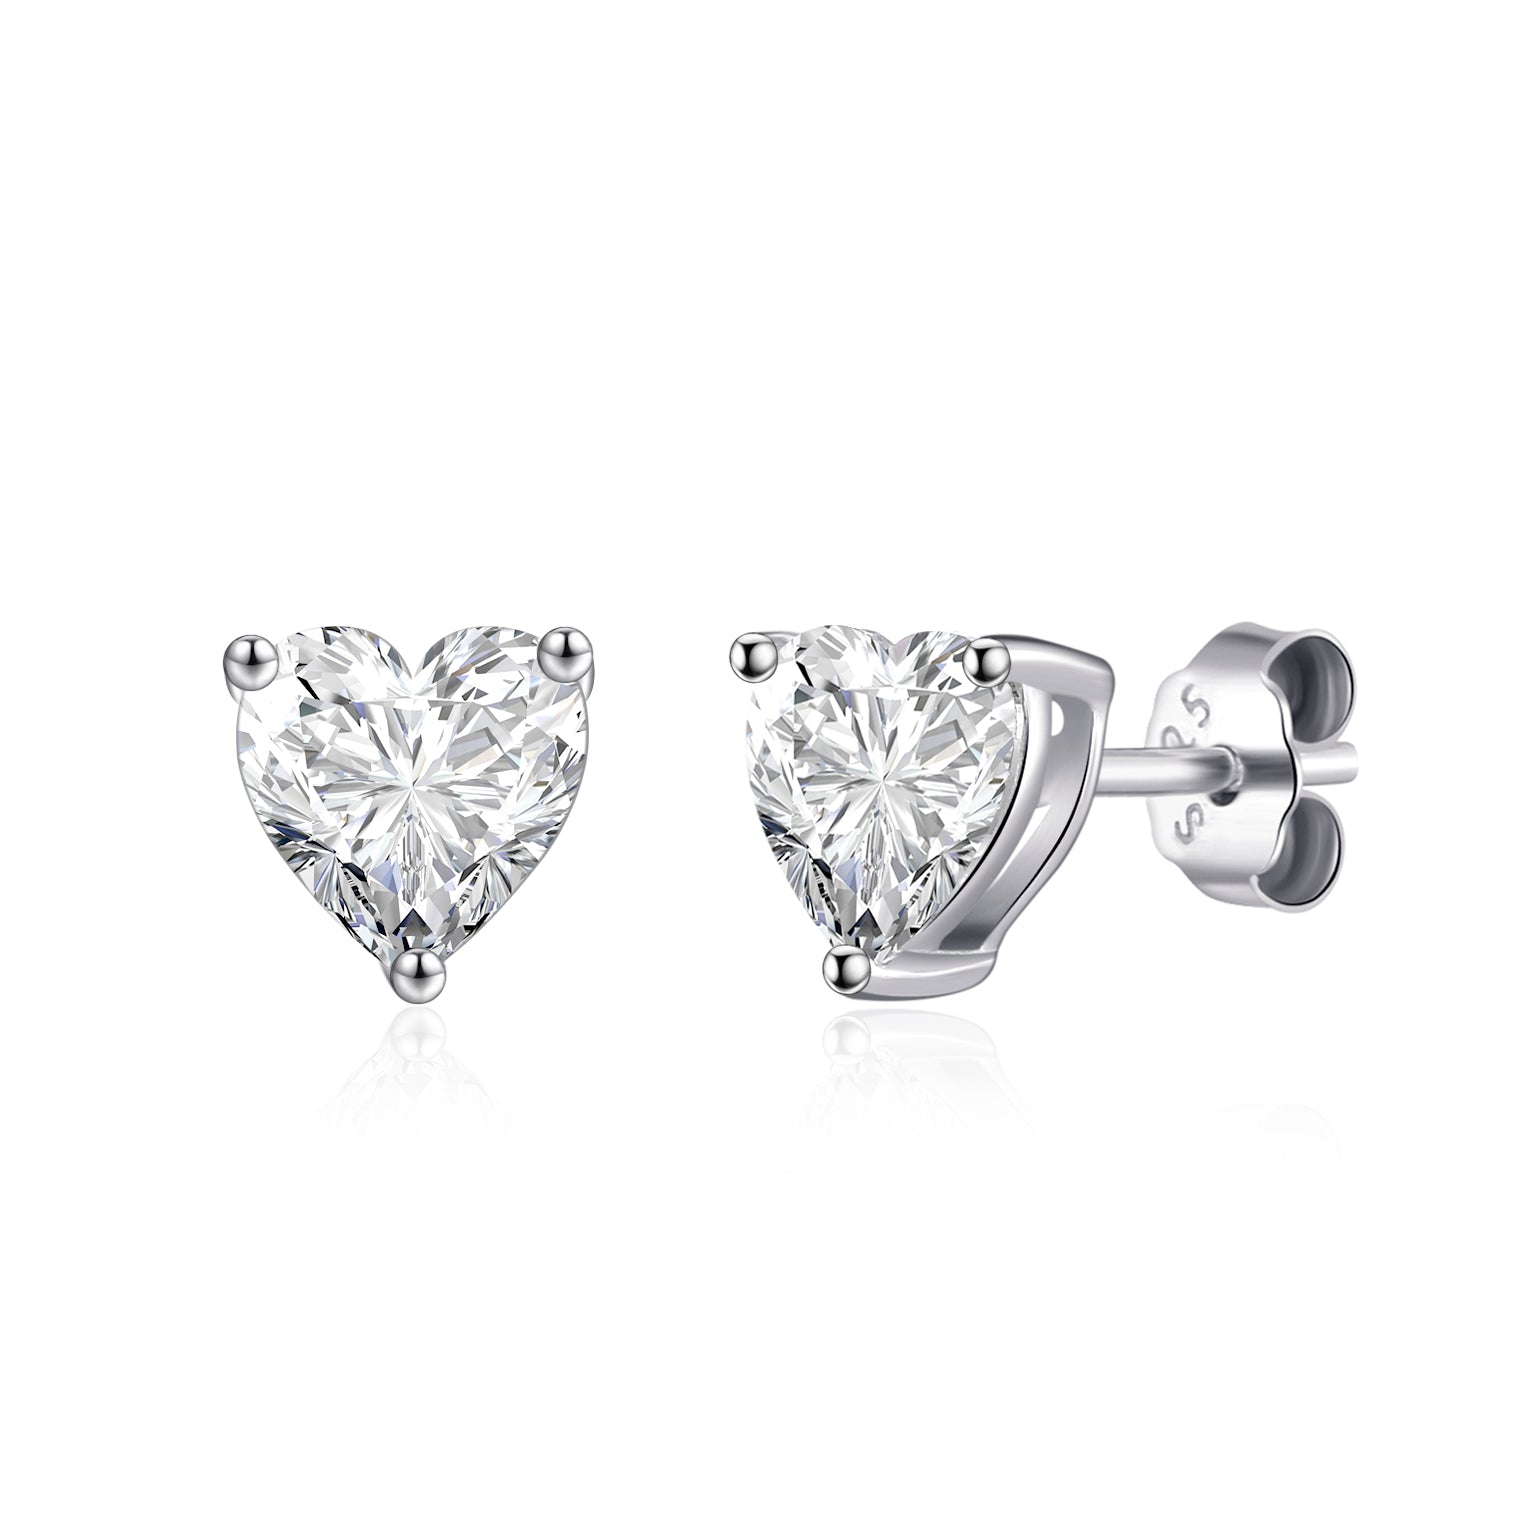 Sterling Silver Heart Stud Earrings Created with Zircondia® Crystals by Philip Jones Jewellery